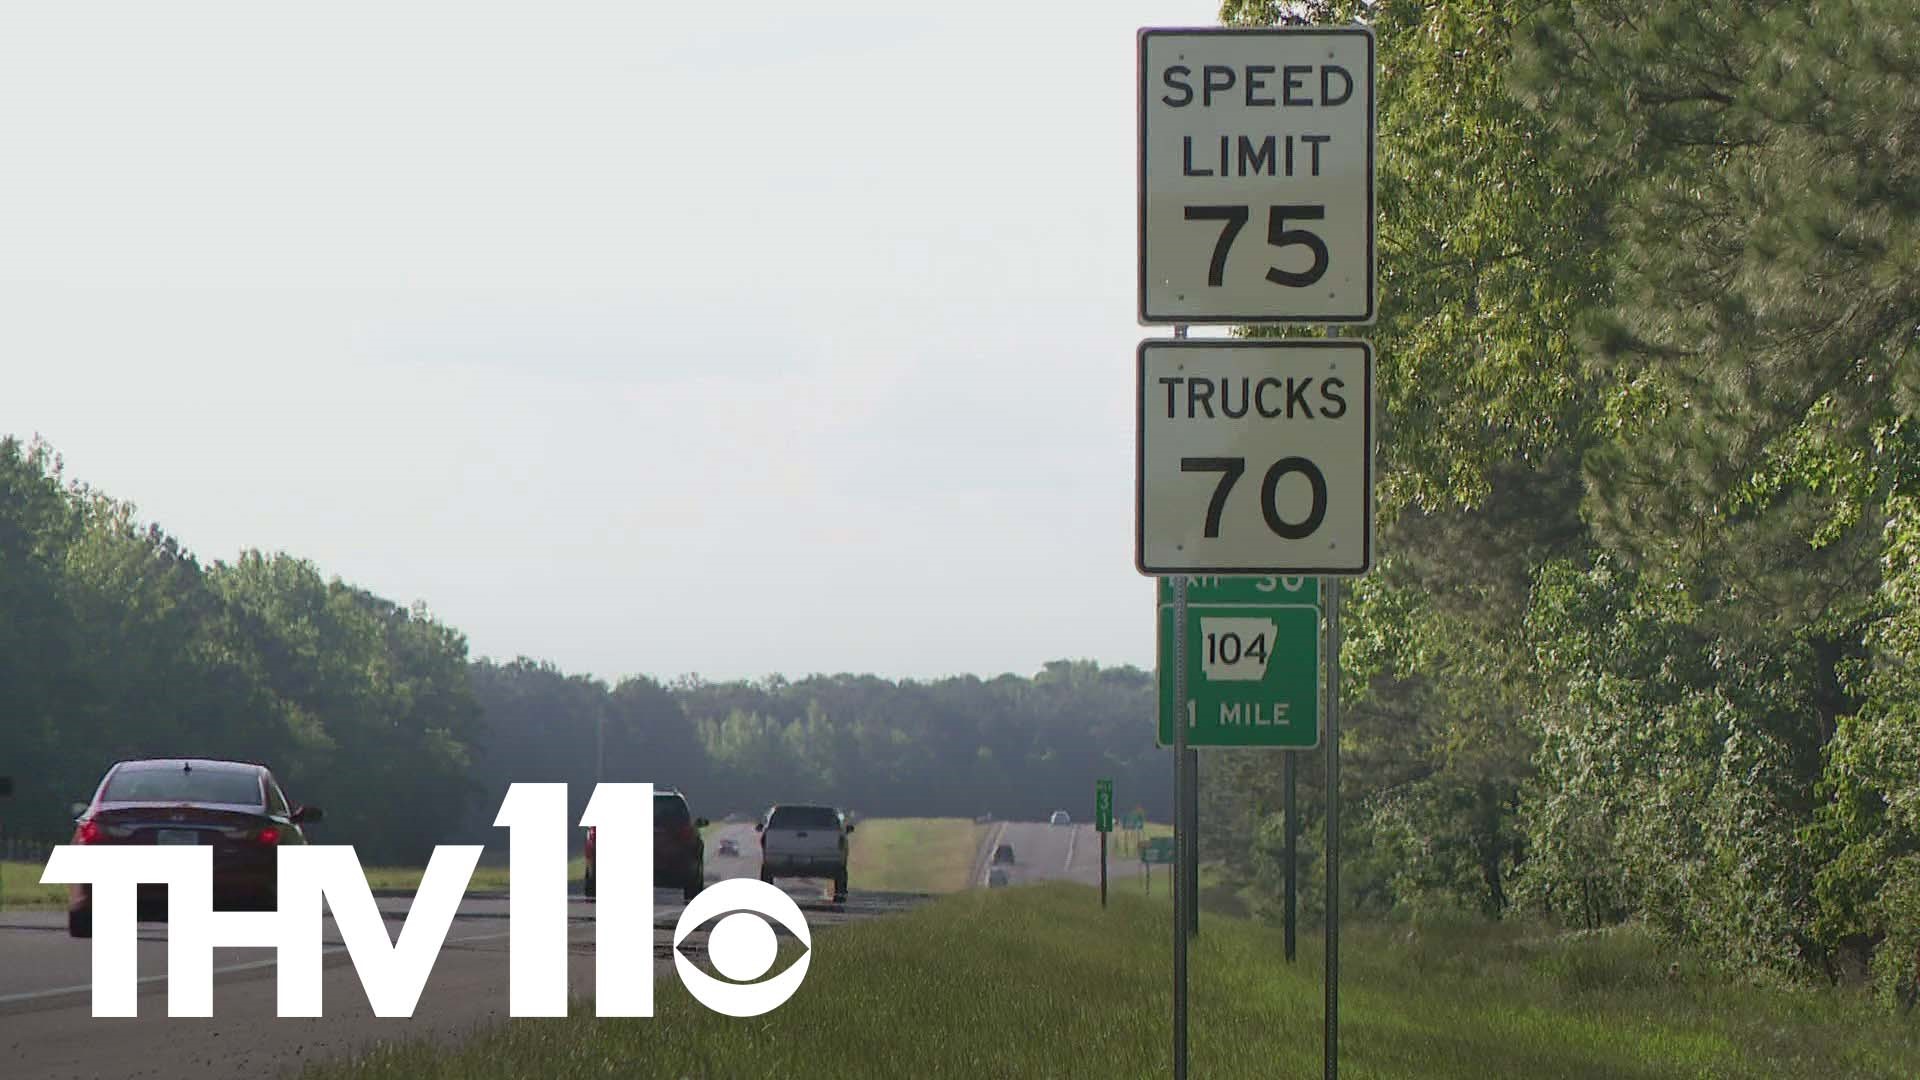 Three years ago, Arkansas lawmakers authorized 75 mph speed limits on certain highways in the state. But, could changes be on the way?